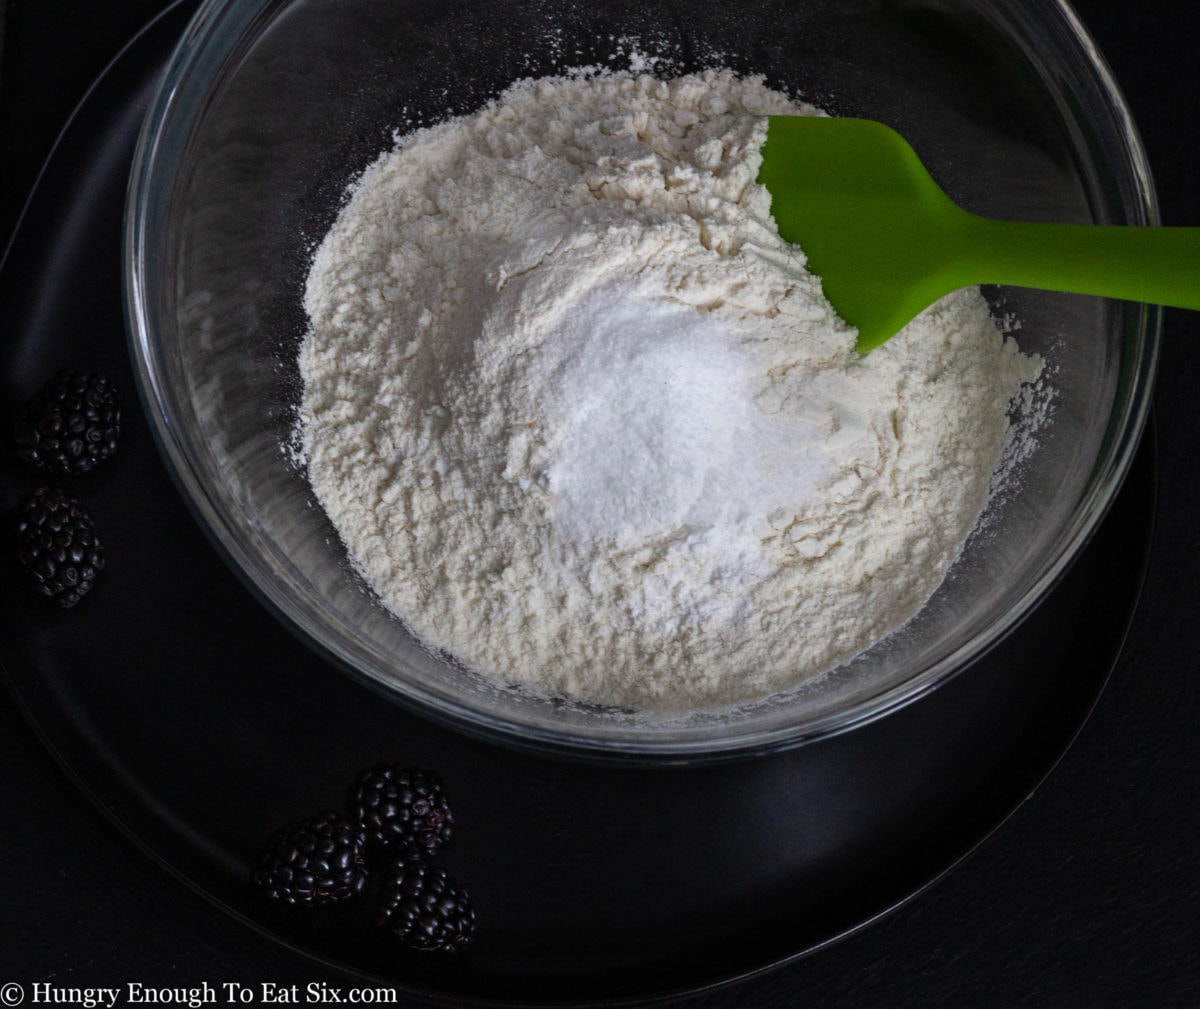 Flour and dry ingredients in a glass bowl with a green spatula